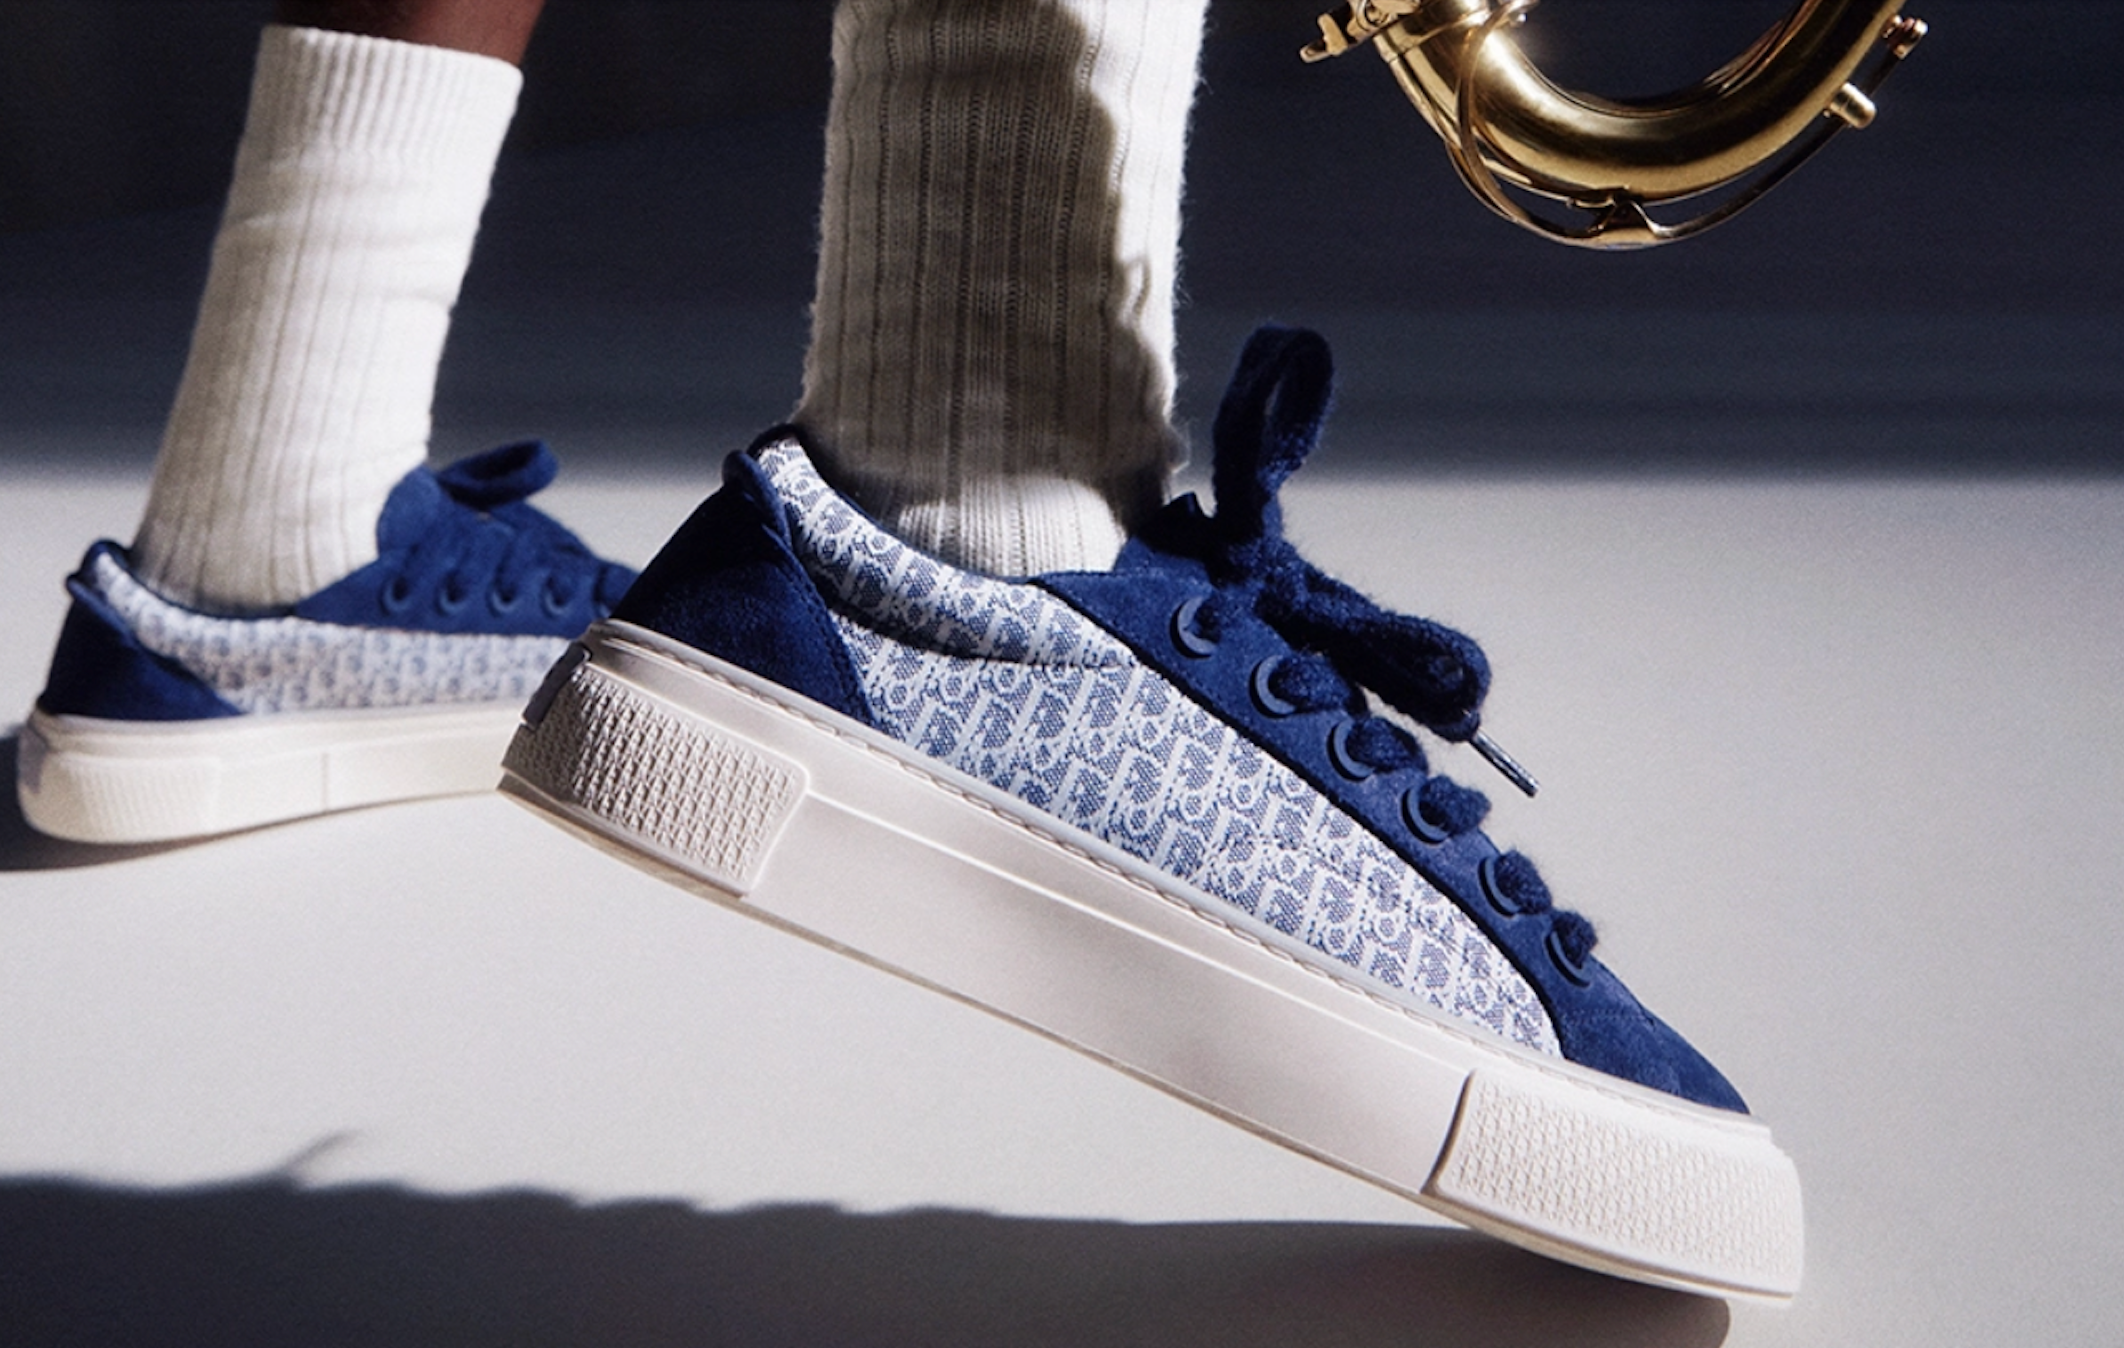 Overpriced Puma dupe? Fashion community reacts to Dior’s NFT-connected sneaker